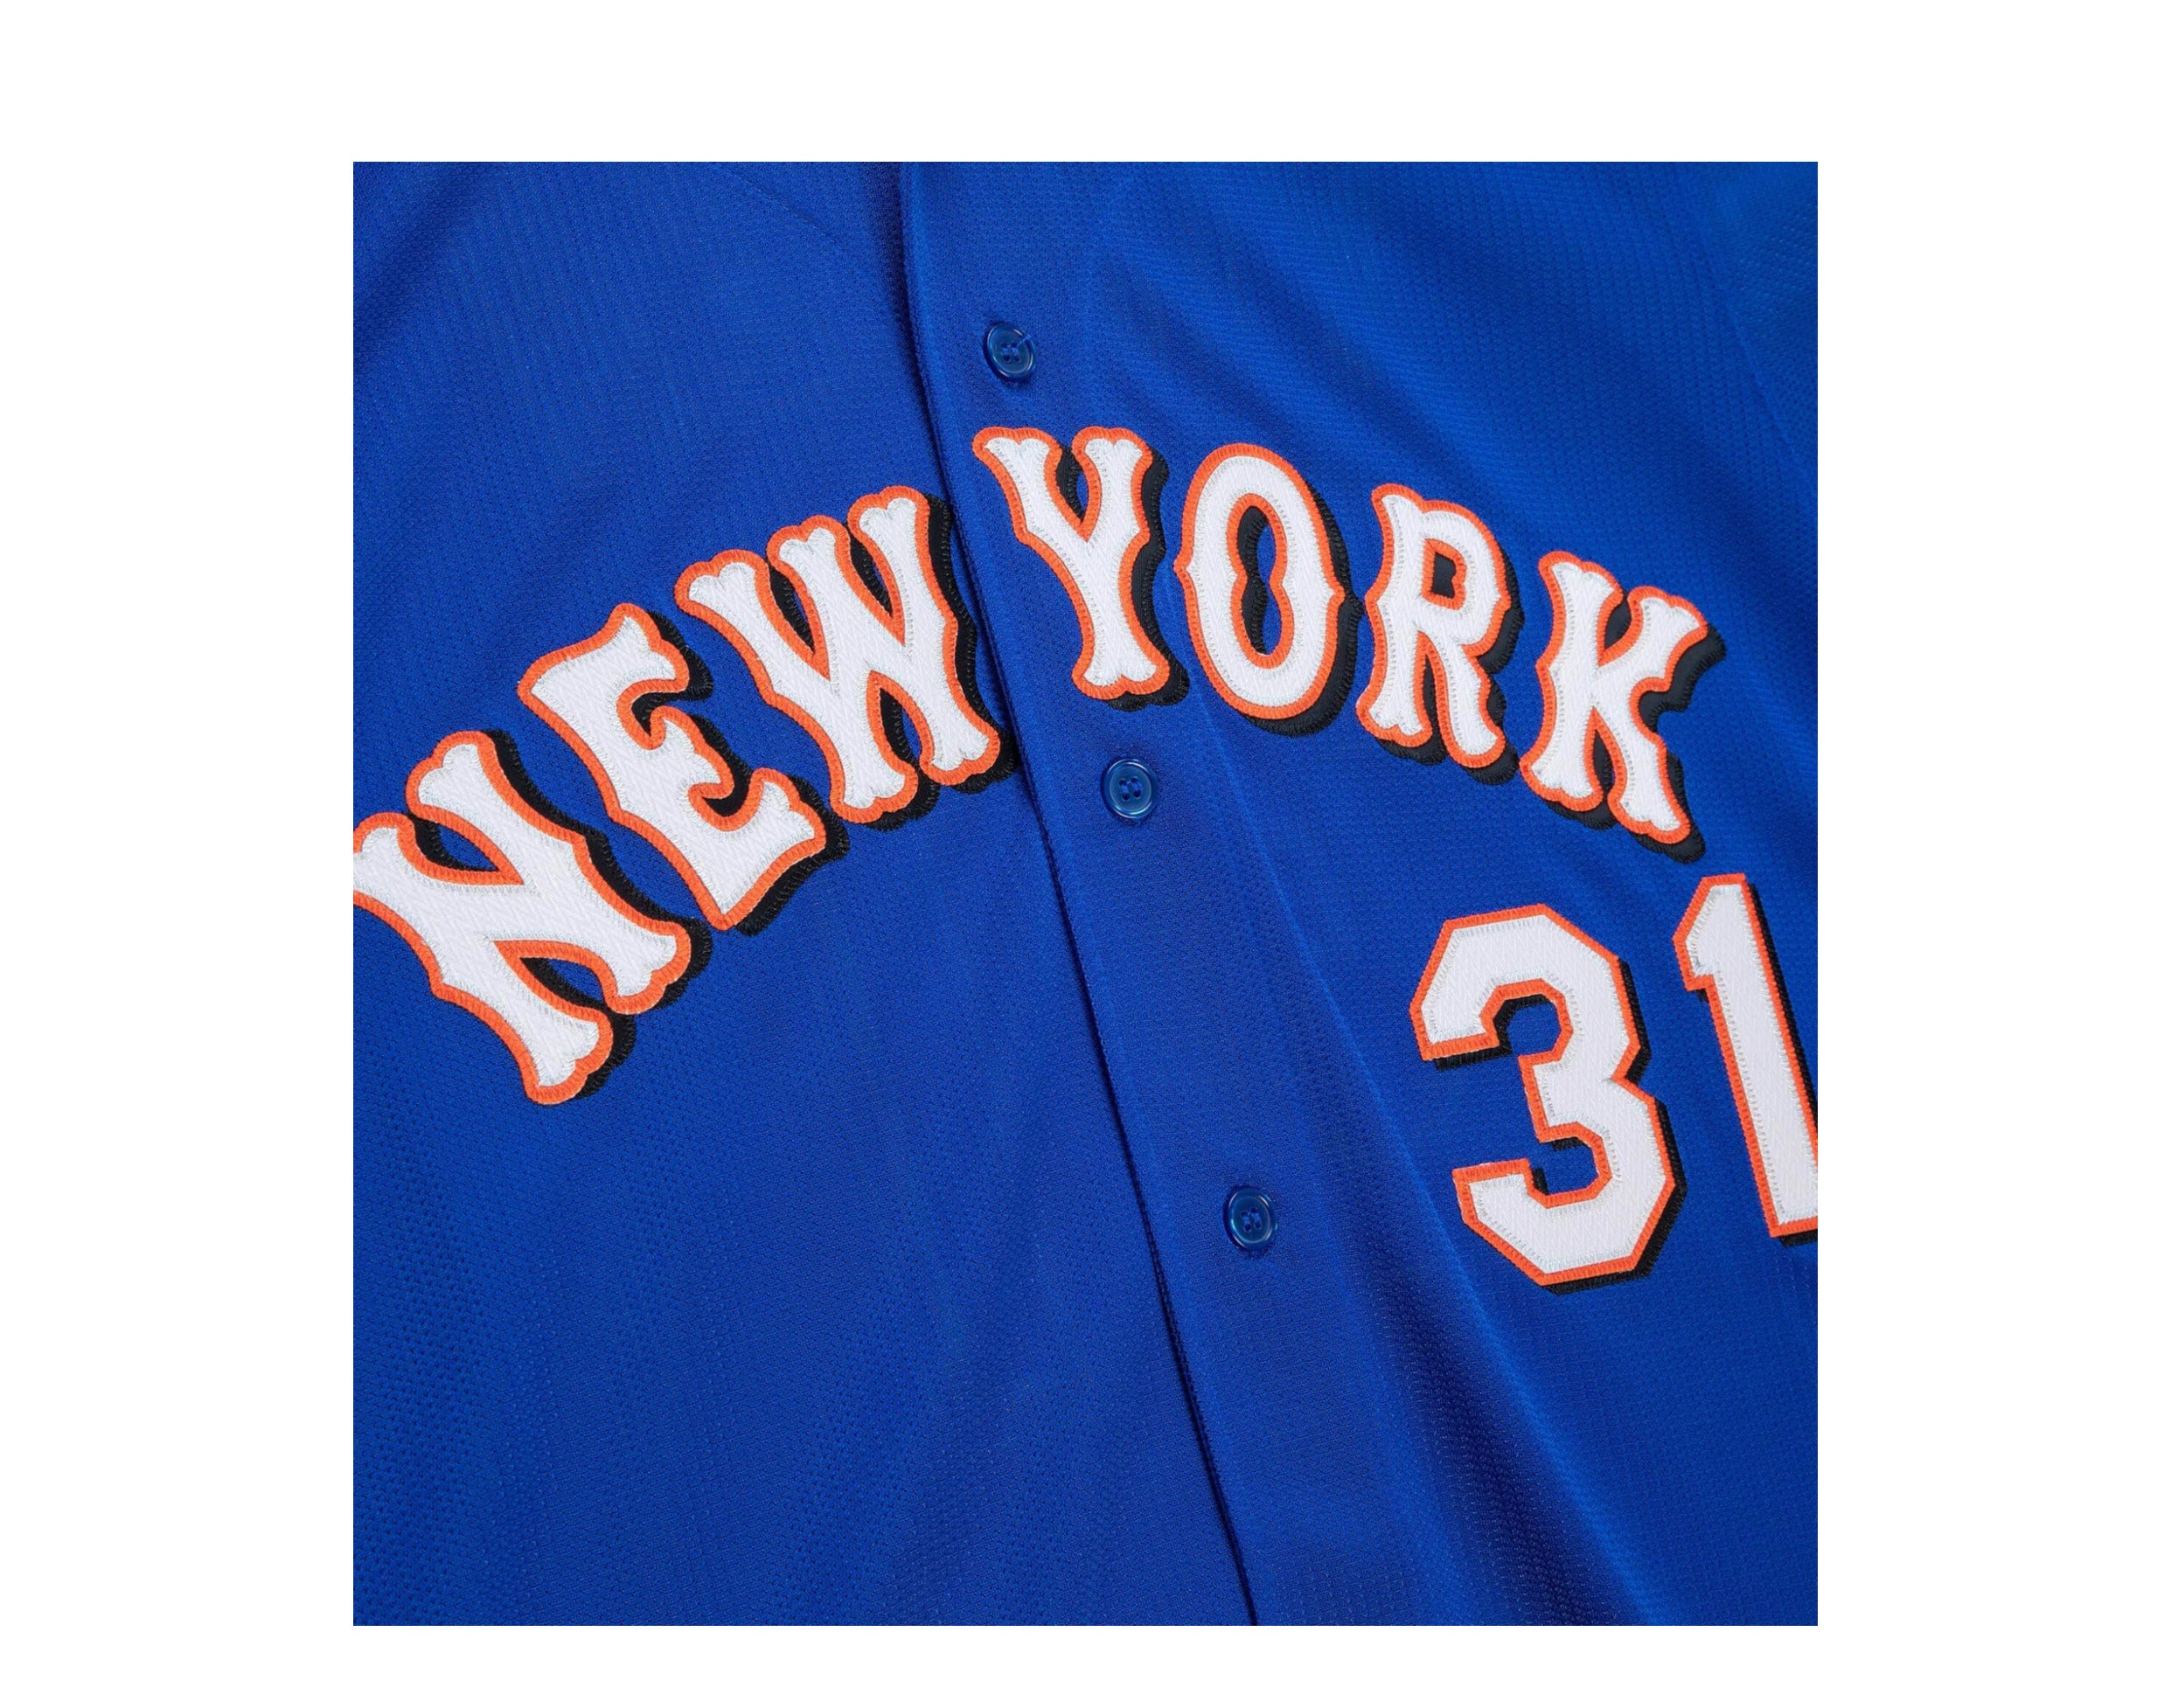 Shop Mitchell & Ness New York Mets Mike Piazza 1999 Authentic Jersey  ABBF3111NYM99-RYL blue